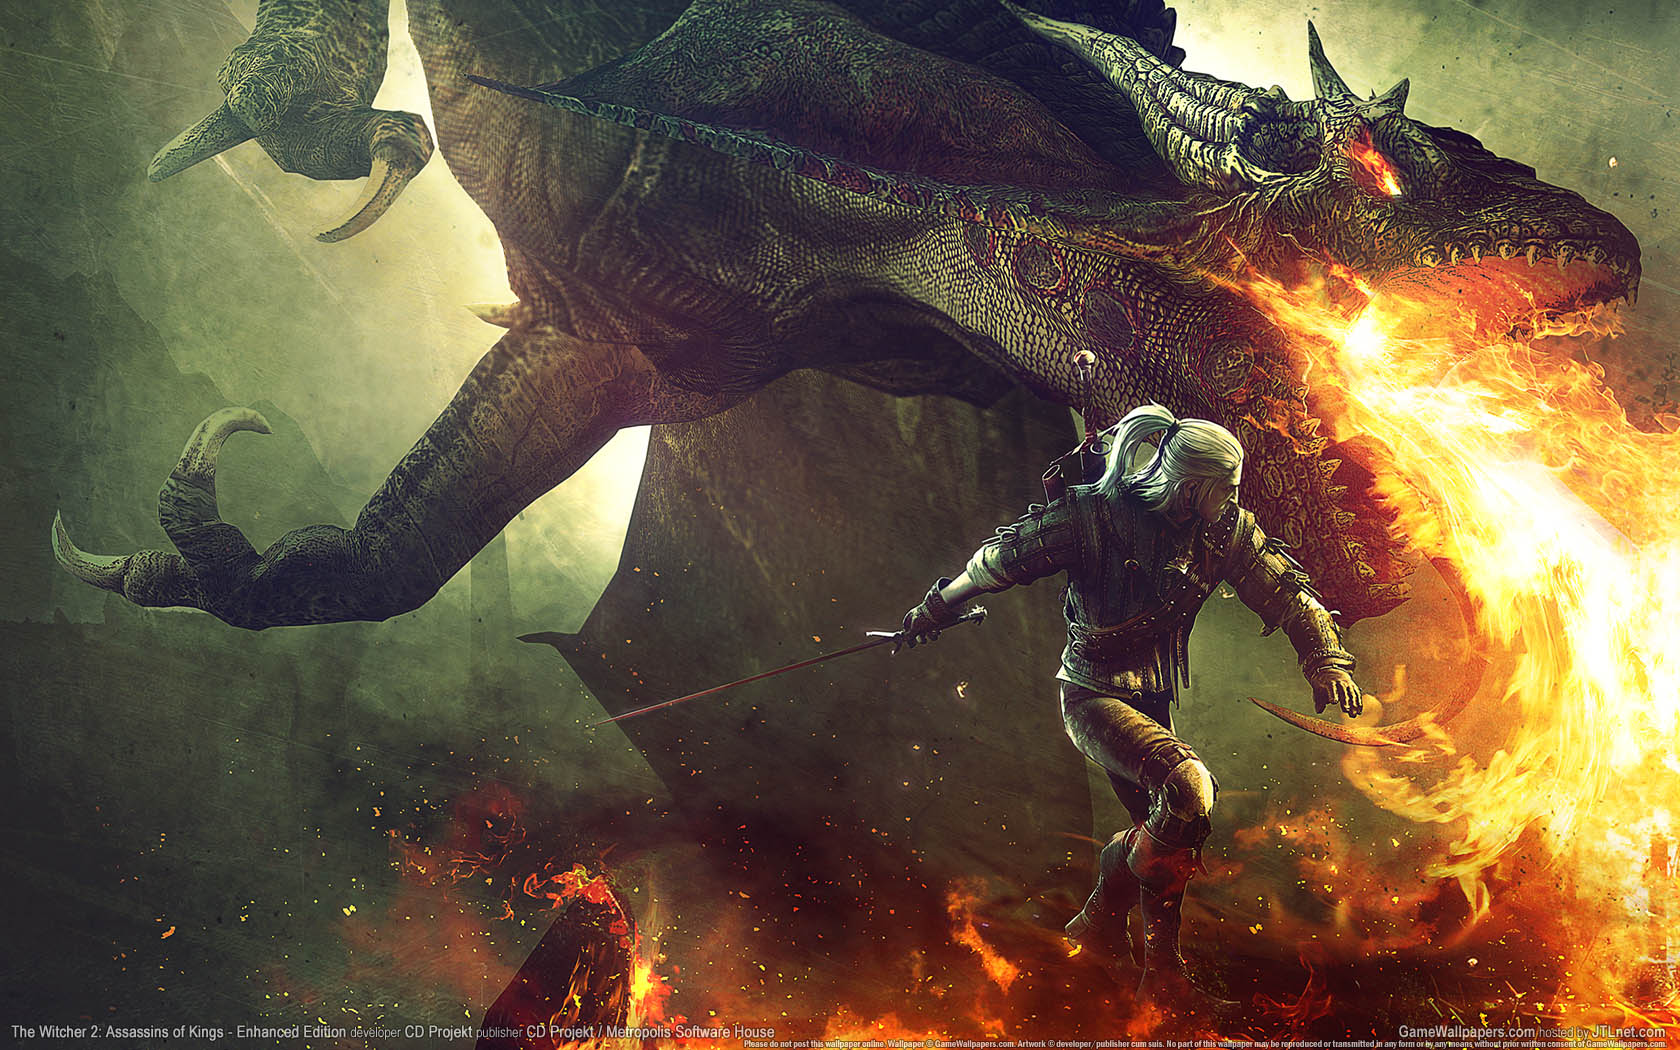 The Witcher 2: Assassins of Kings - Enhanced Edition wallpaper 01 1680x1050